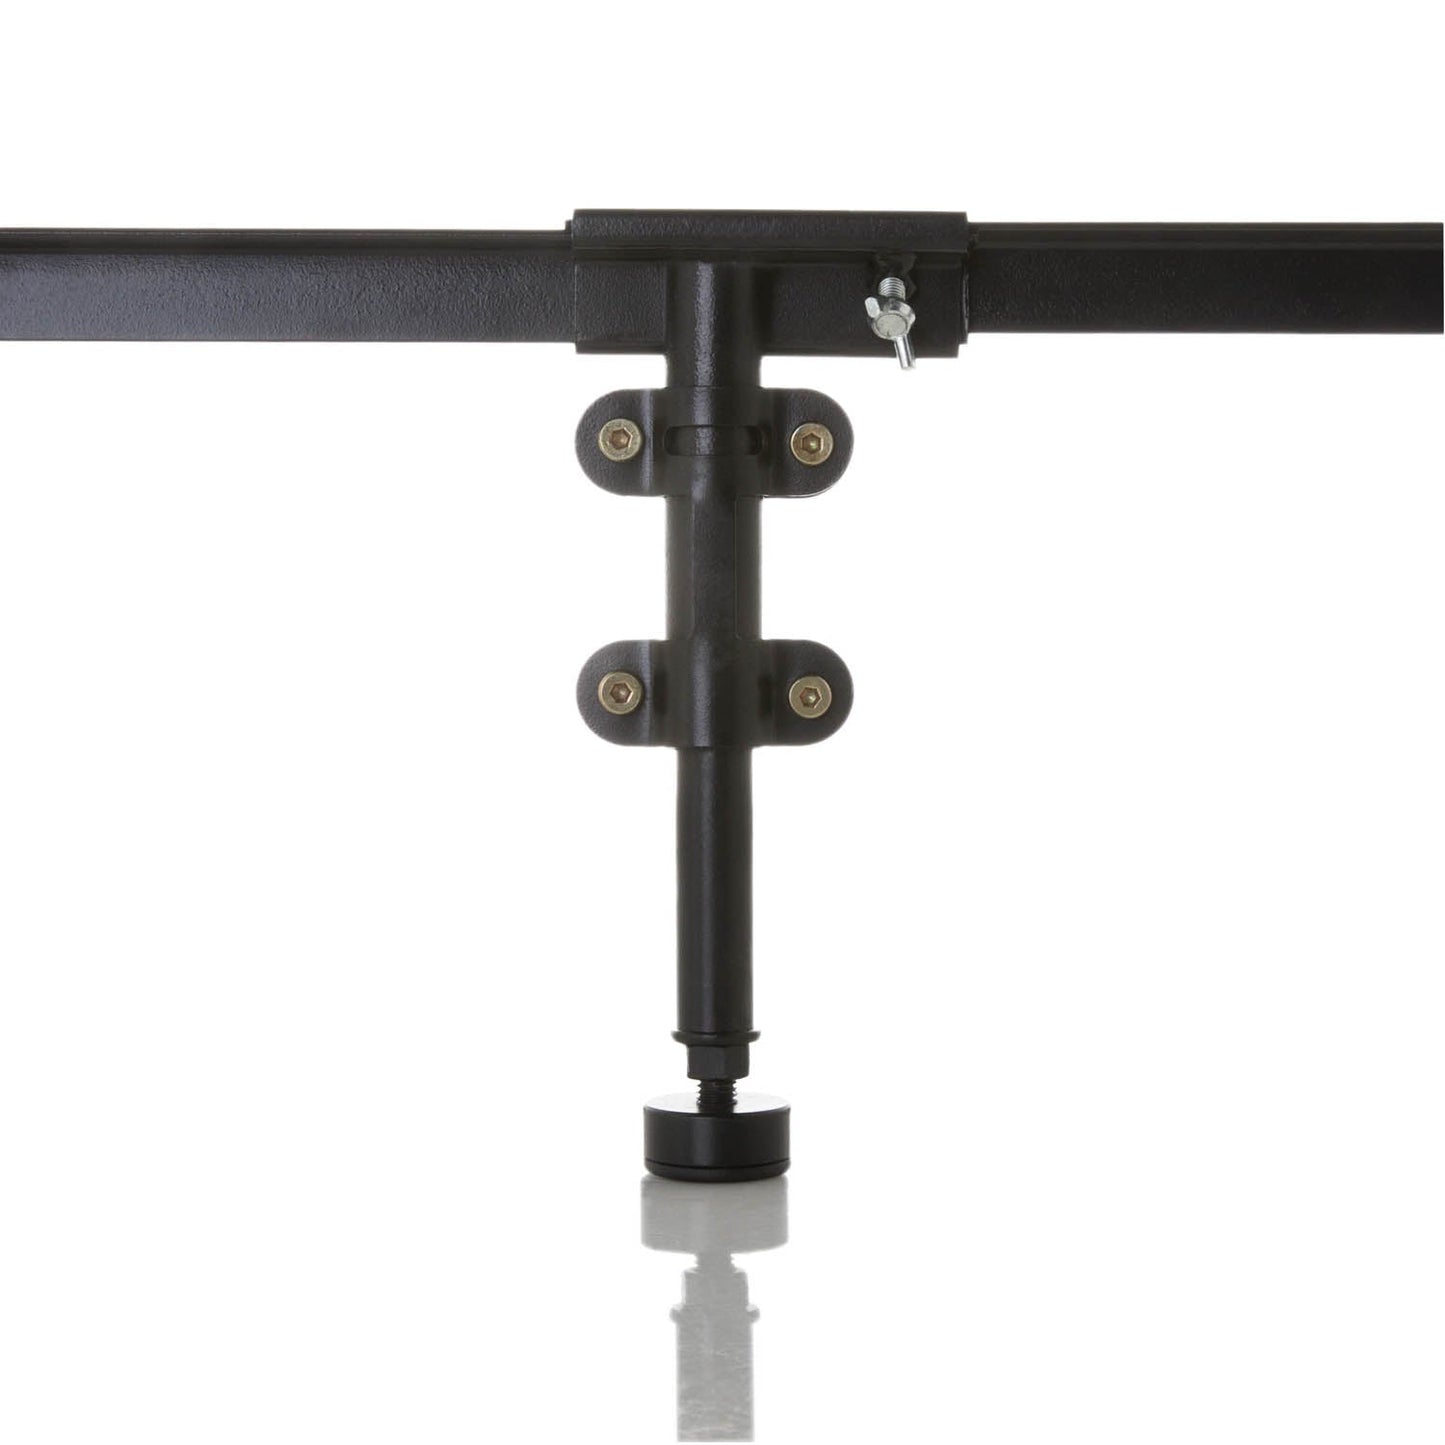 Hook-in Bed Rails with Center Bar